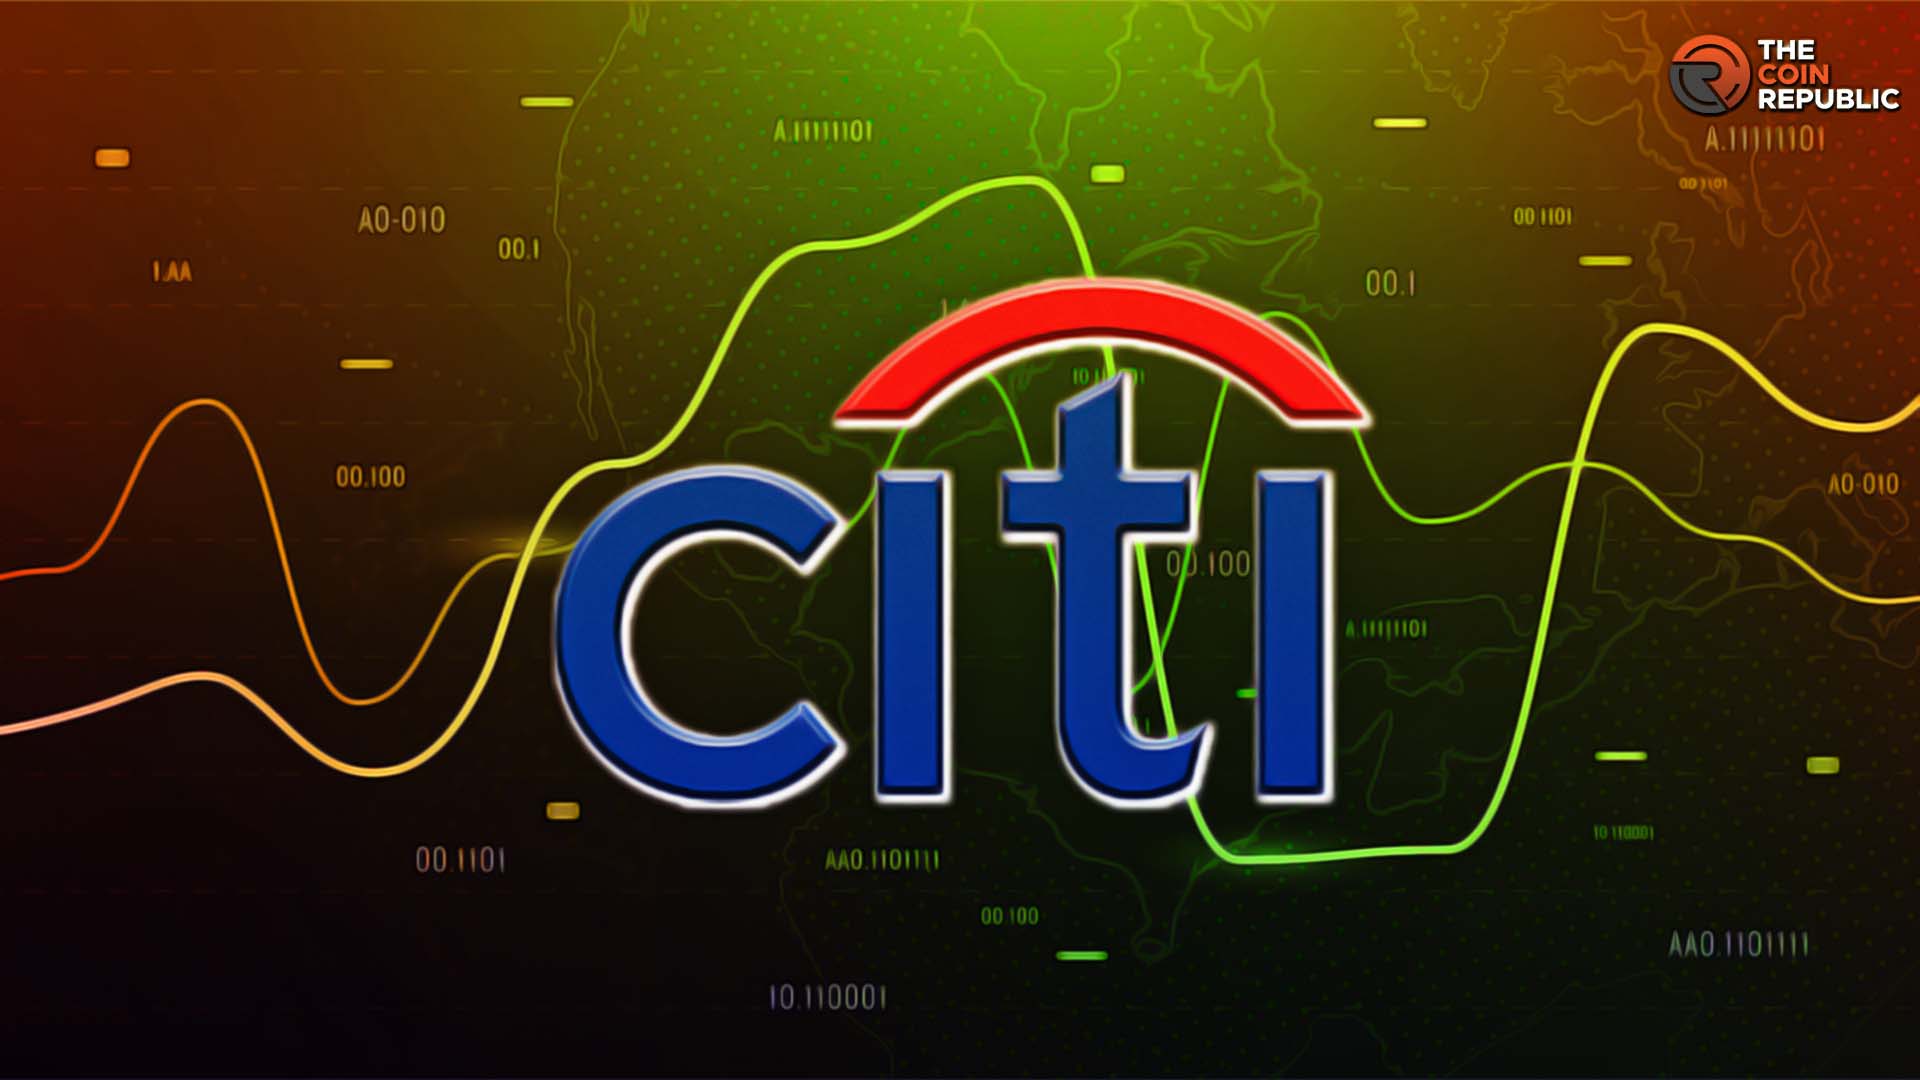 Citigroup Inc. (C Stock) – Earnings Surpassed Expectations 